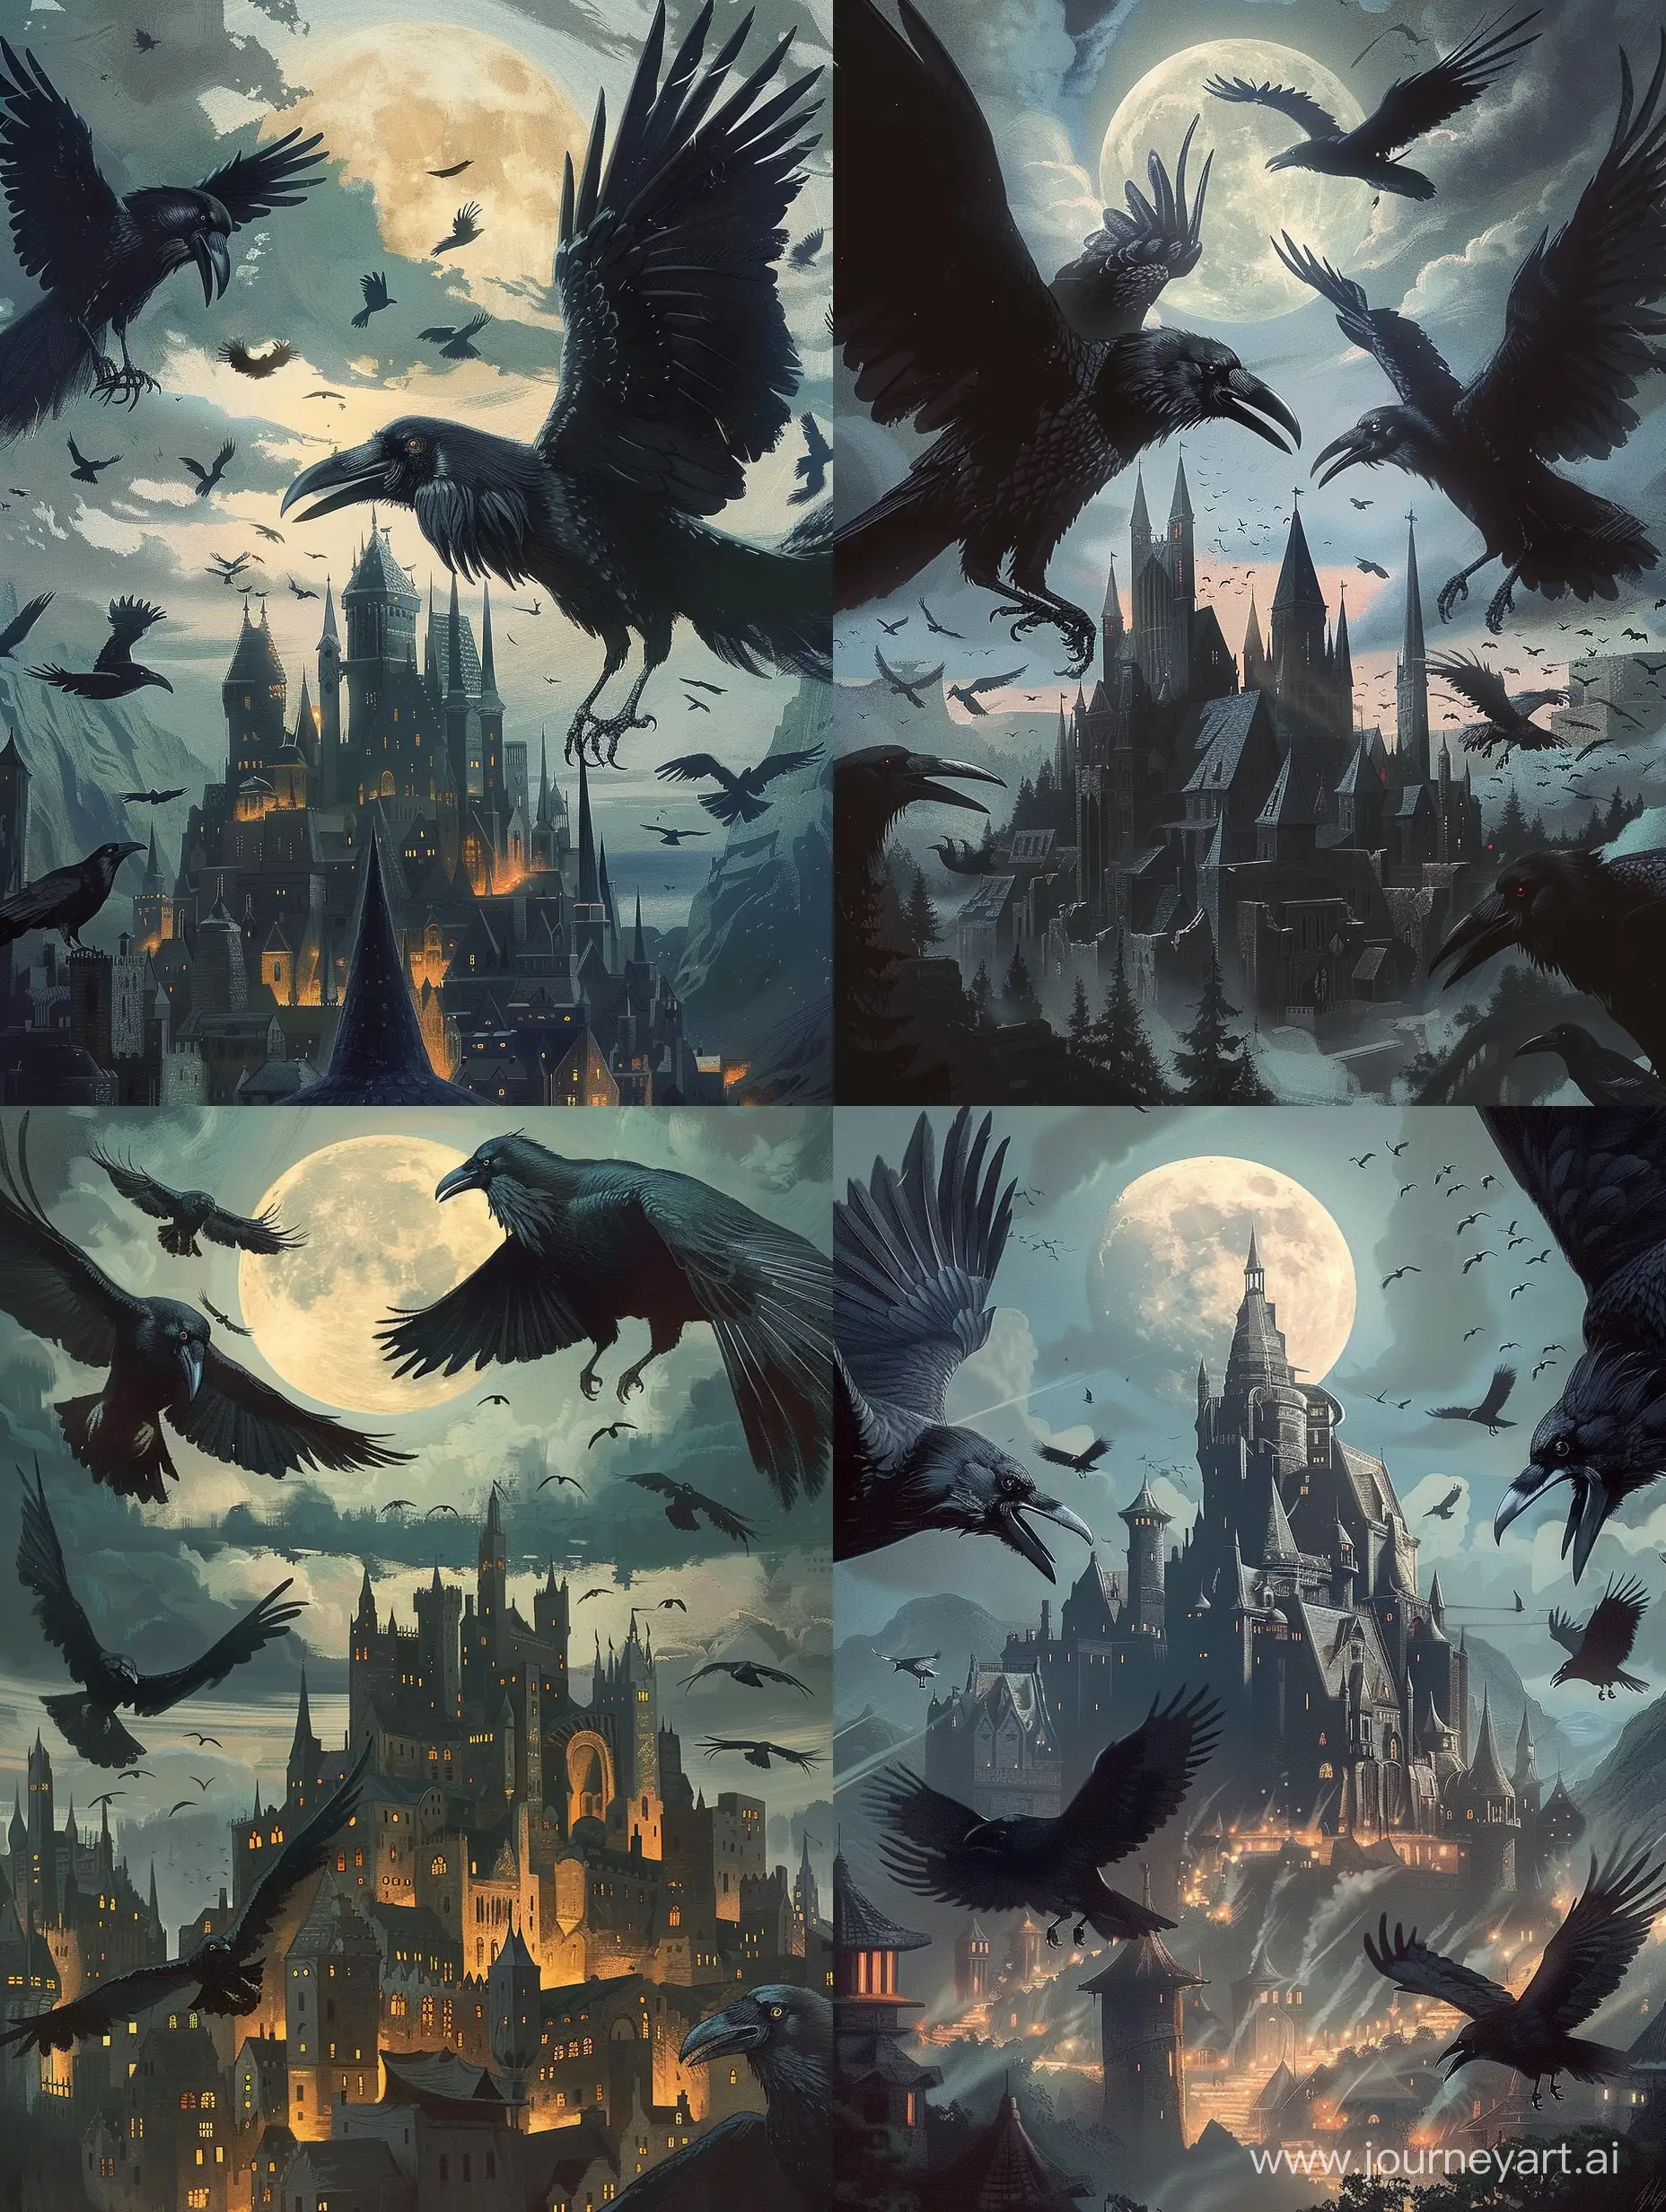 Moonlit-Night-with-Giant-Ravens-Circling-Cityscape